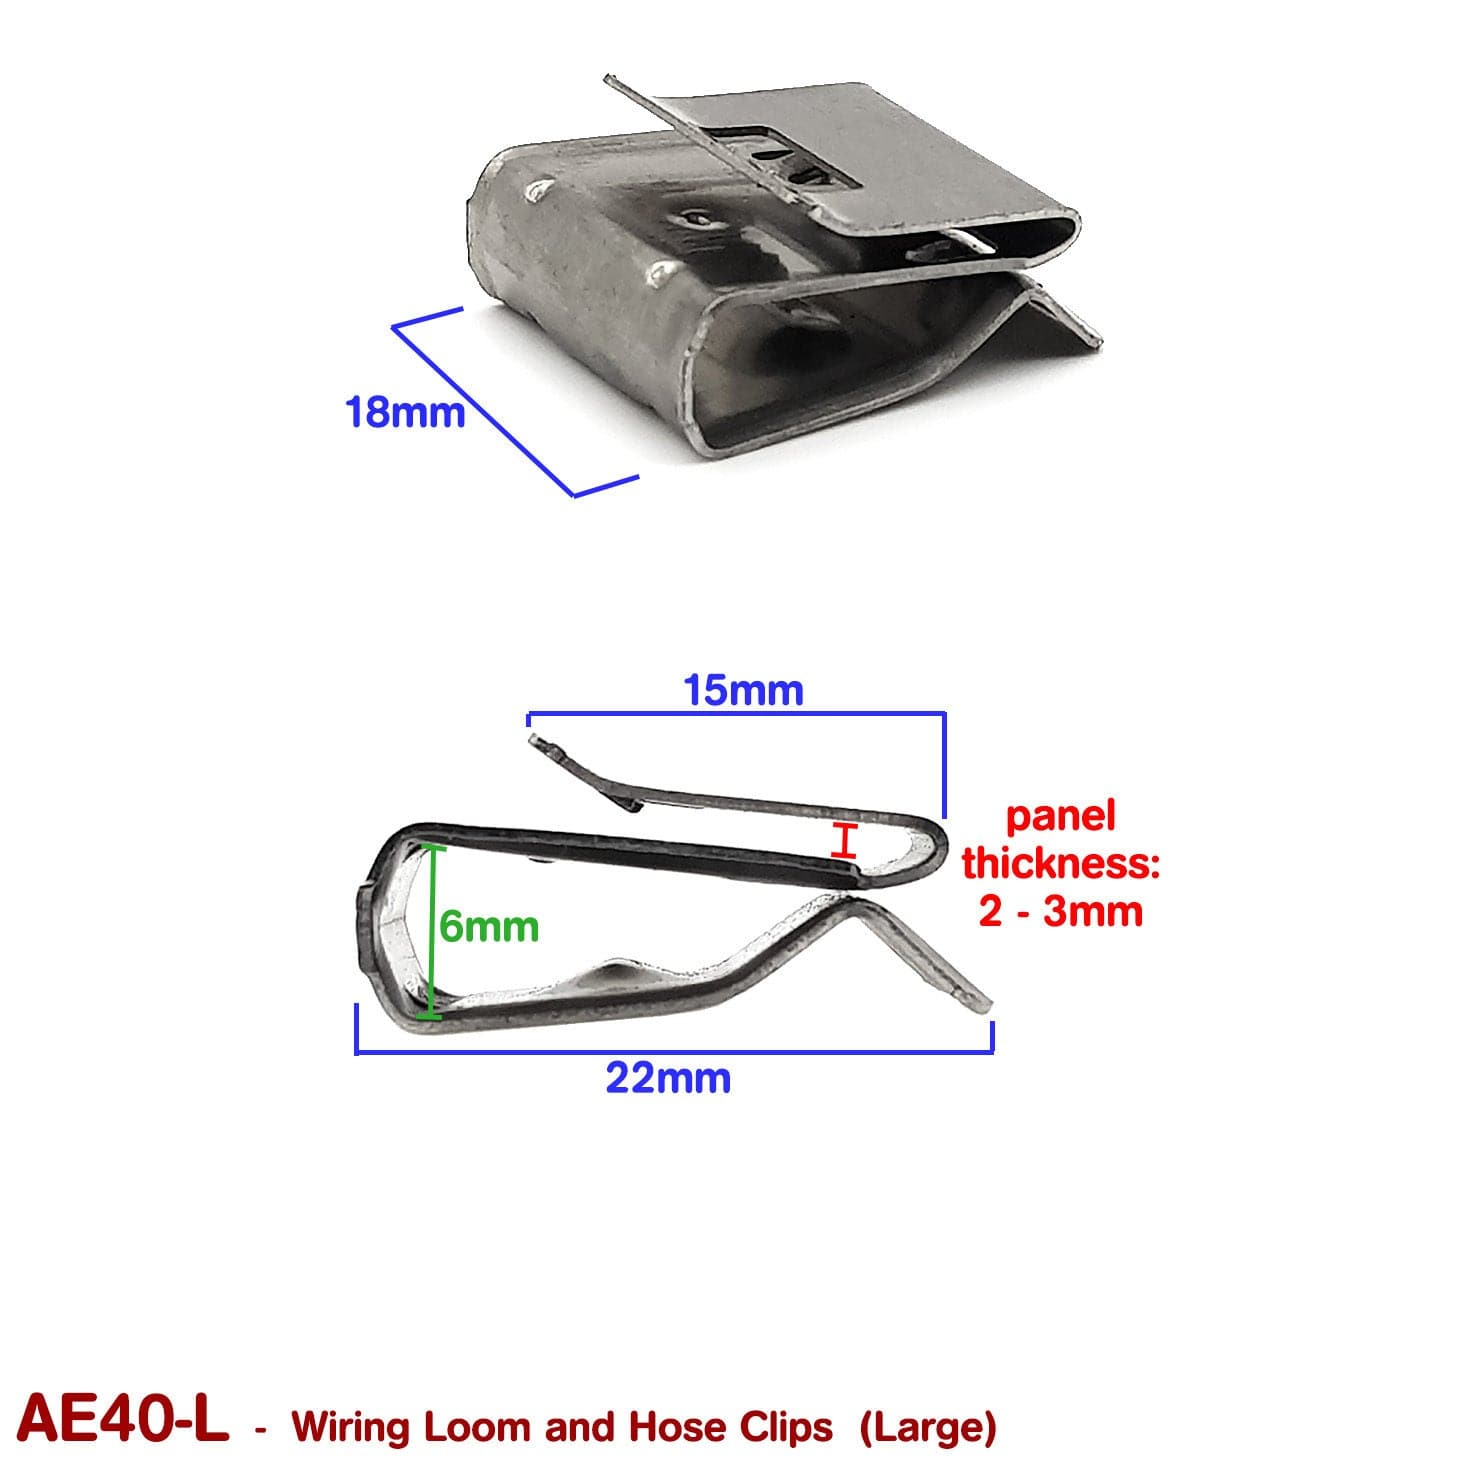 WIRING LOOM and HOSE CLIPS - LARGE